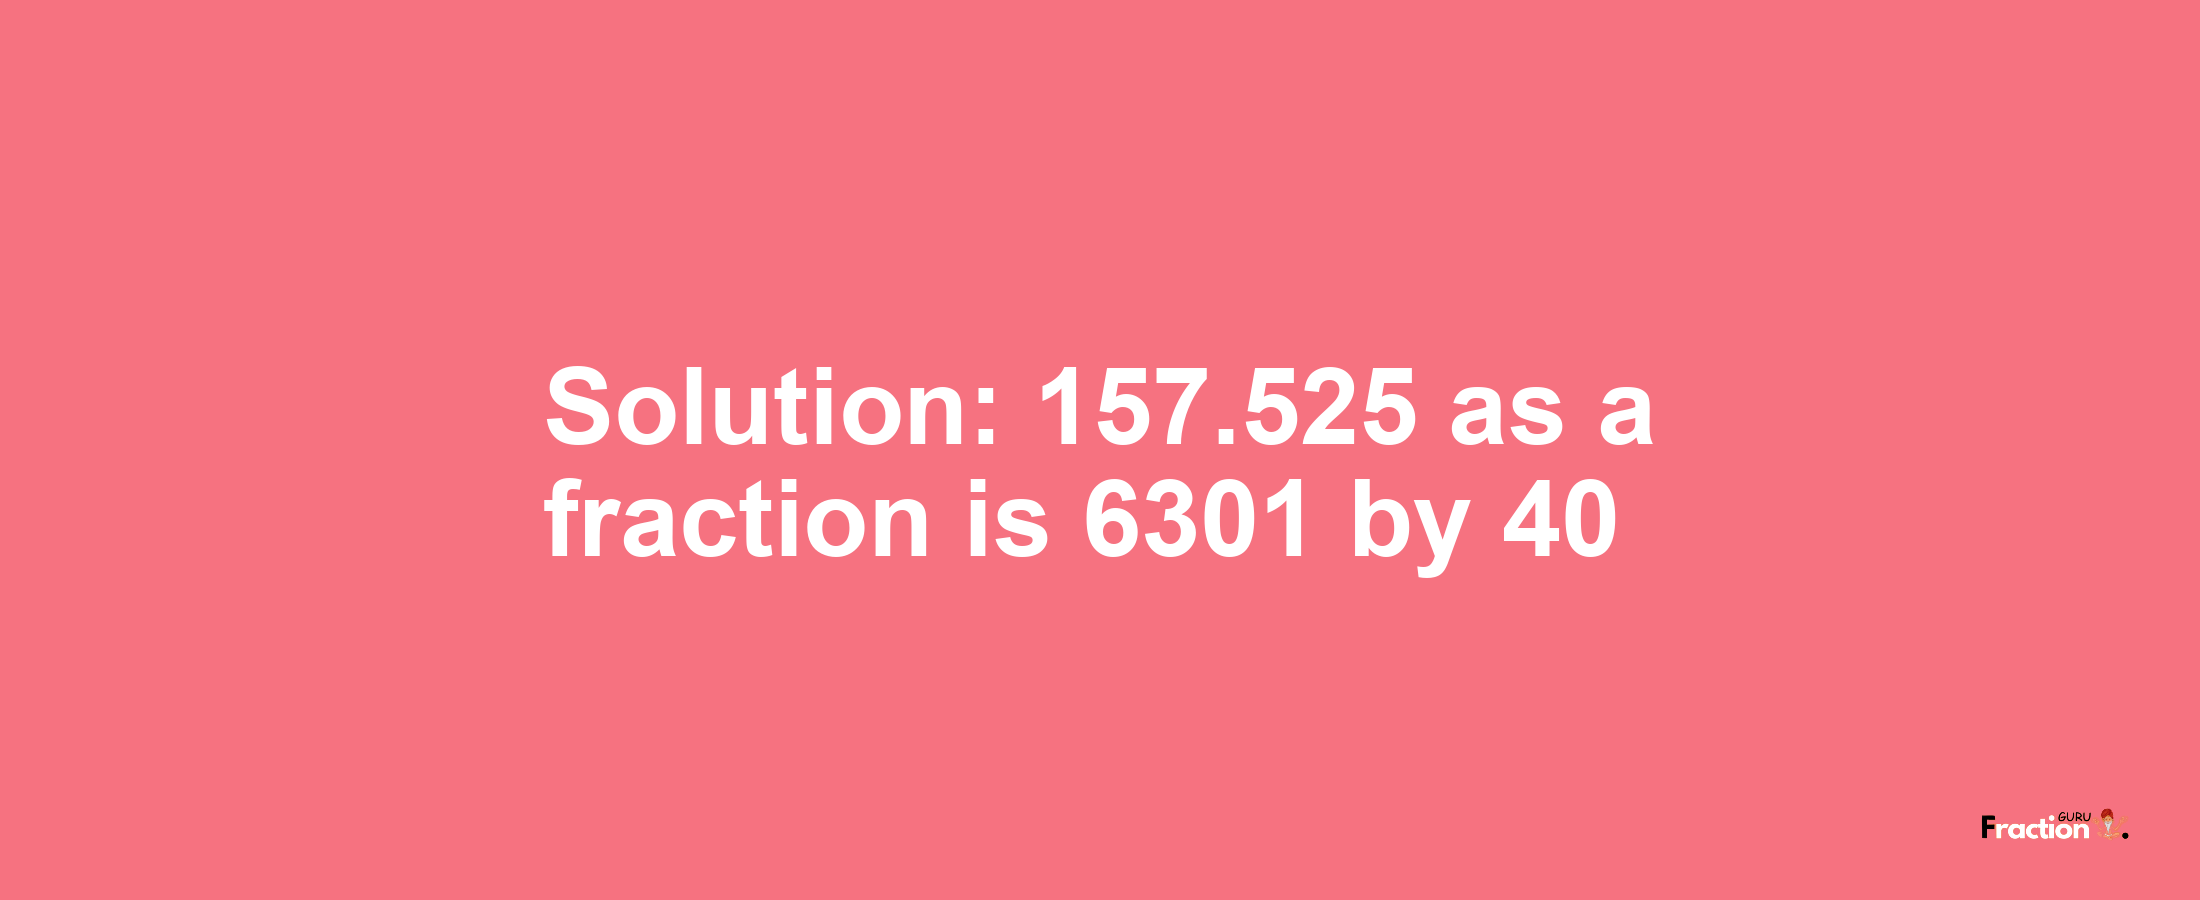 Solution:157.525 as a fraction is 6301/40